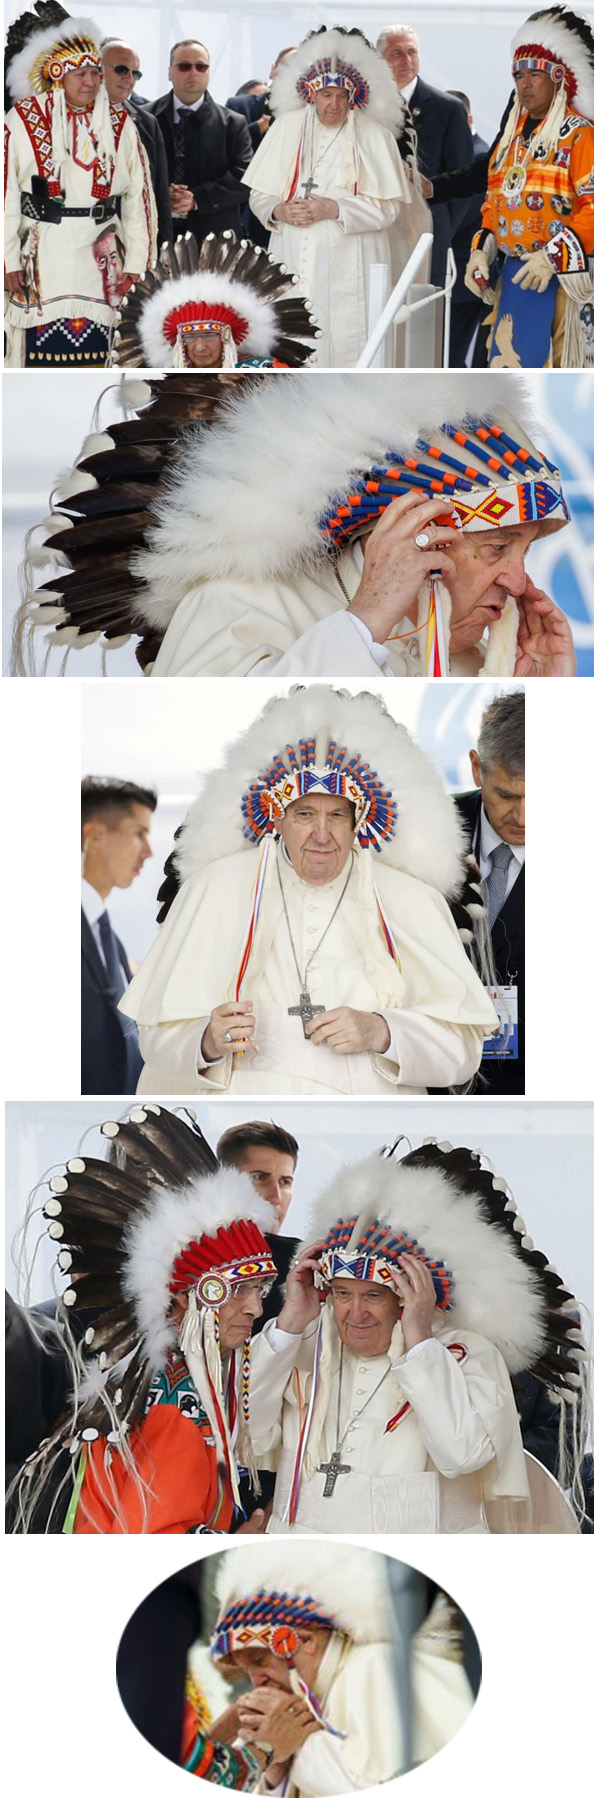 "Francis with headdress in Canada